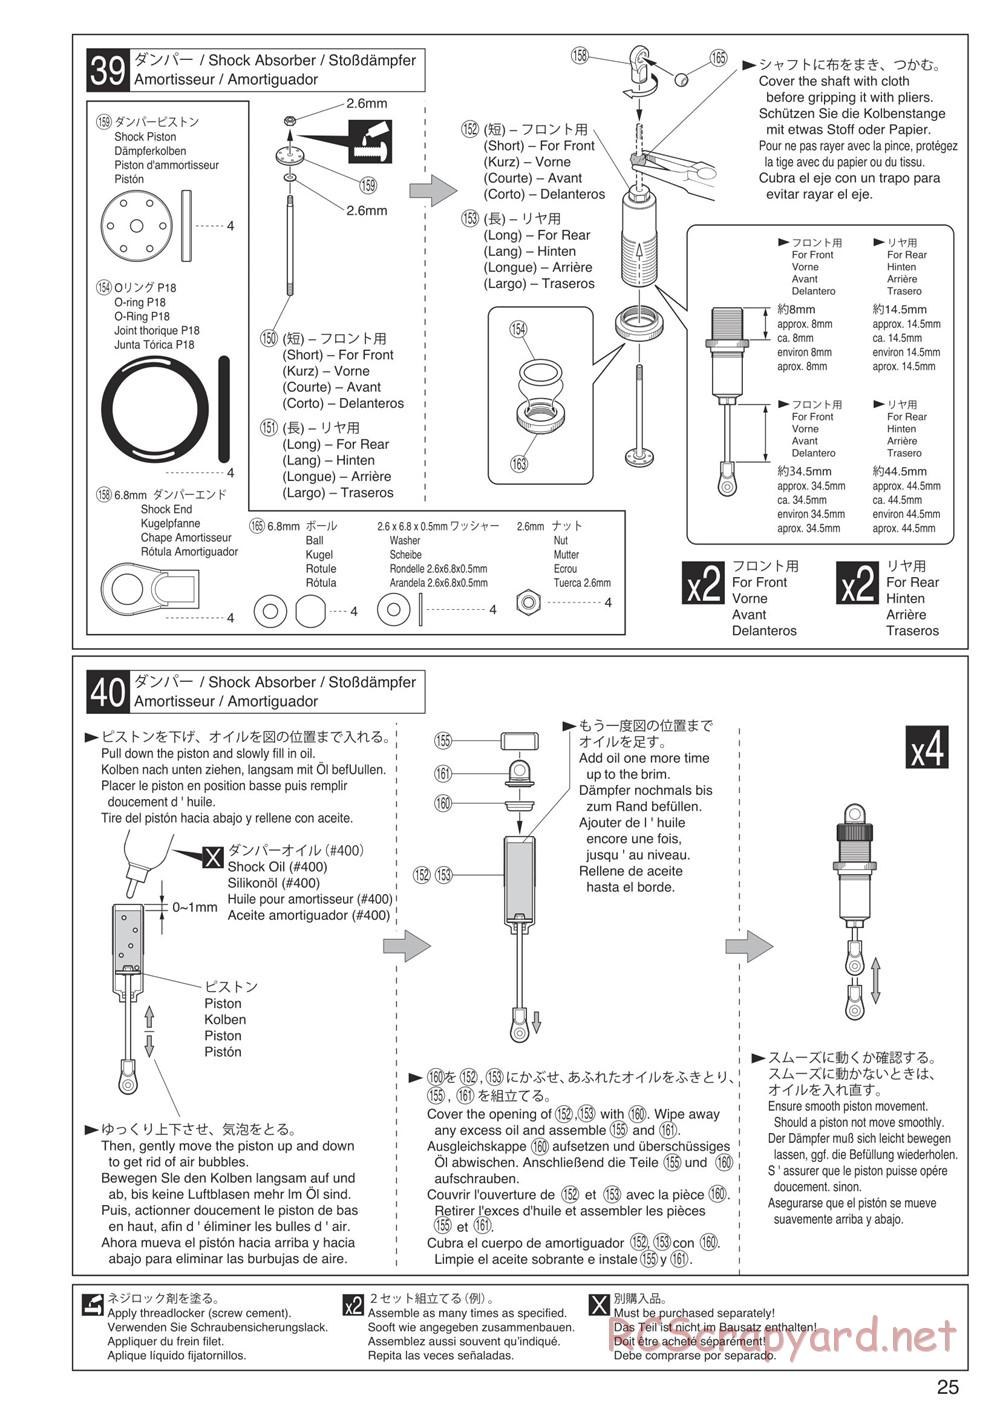 Kyosho - Inferno Neo - Manual - Page 25